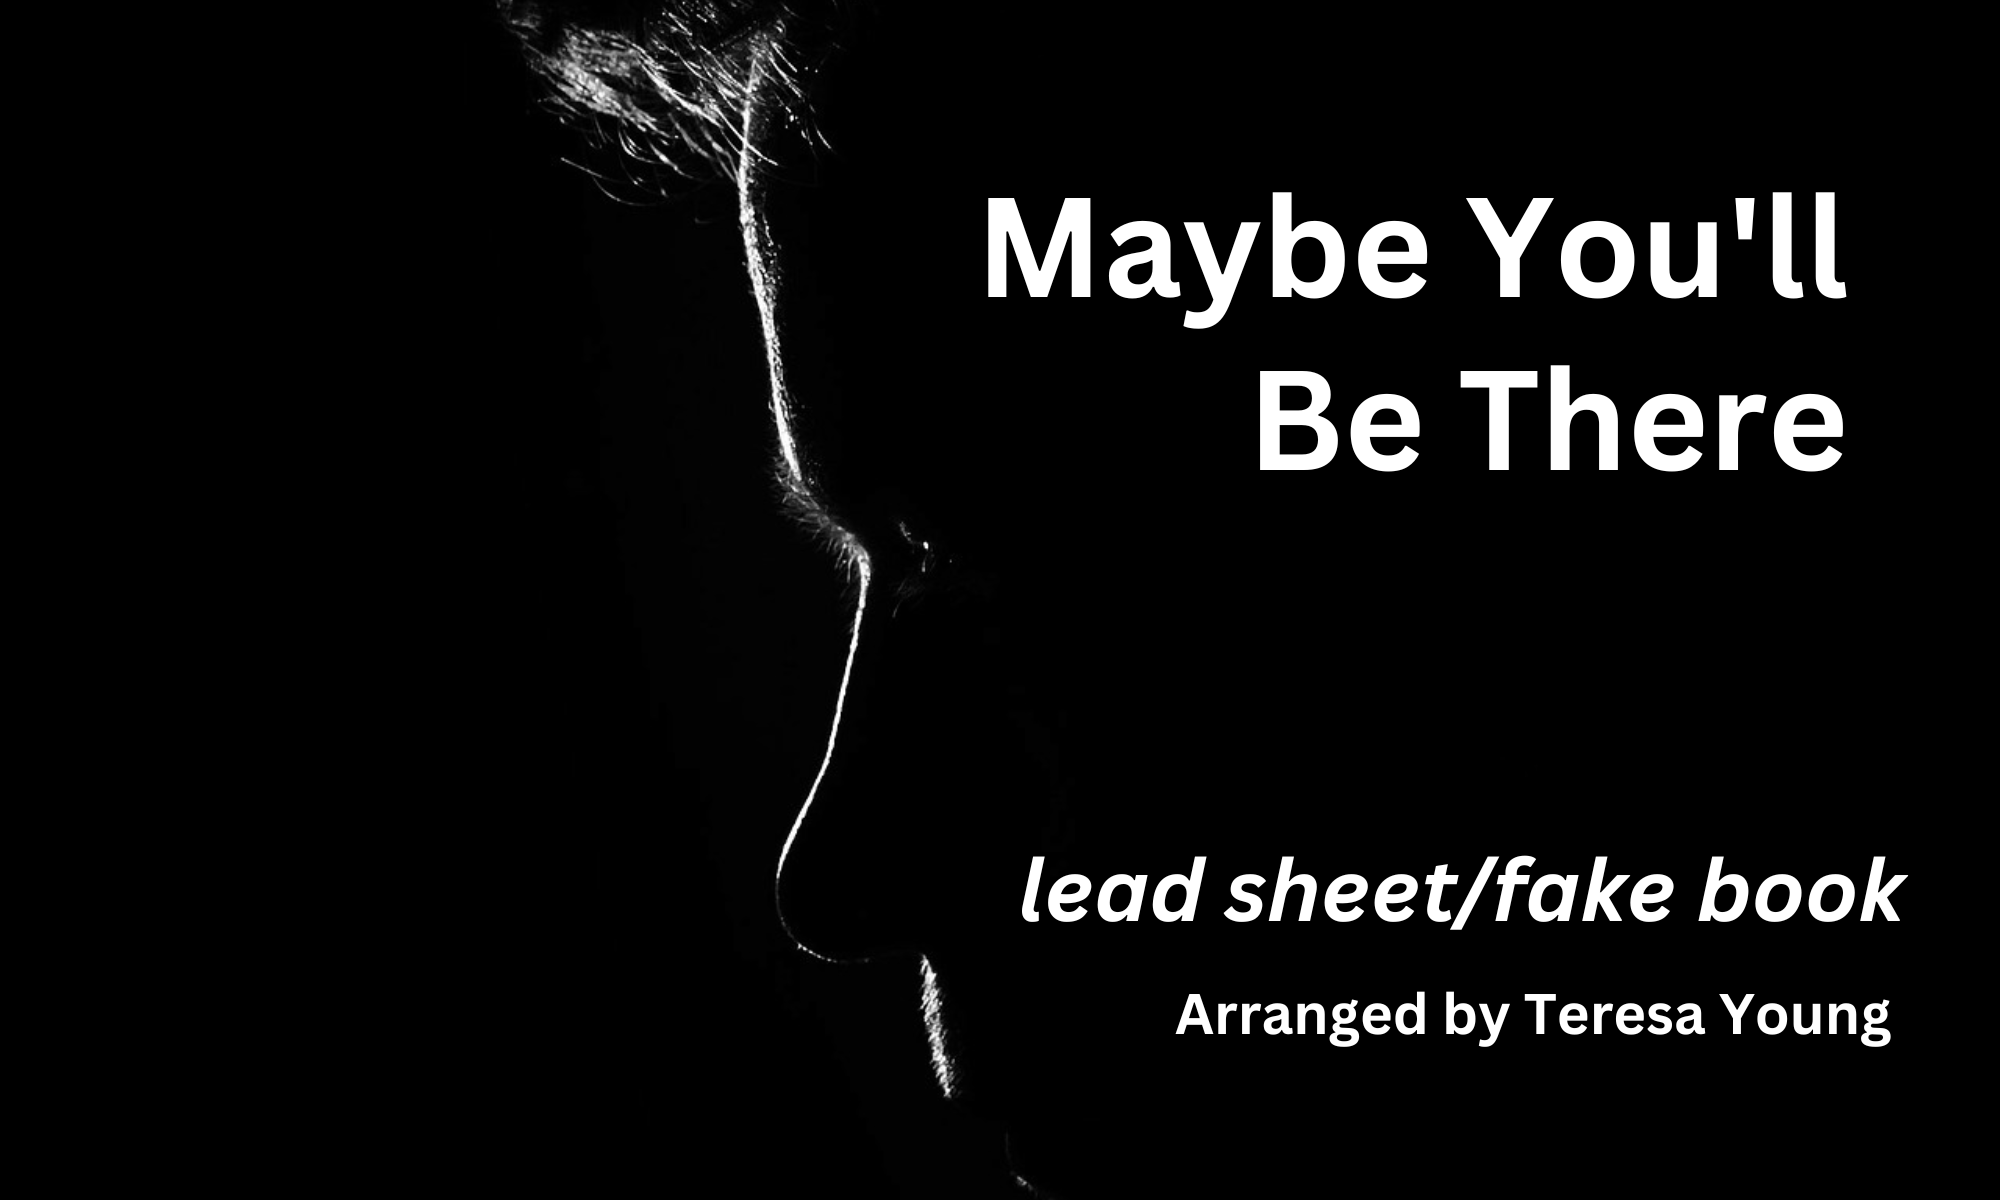 Maybe You'll Be There, lead sheet fake book, arranged by Teresa Young